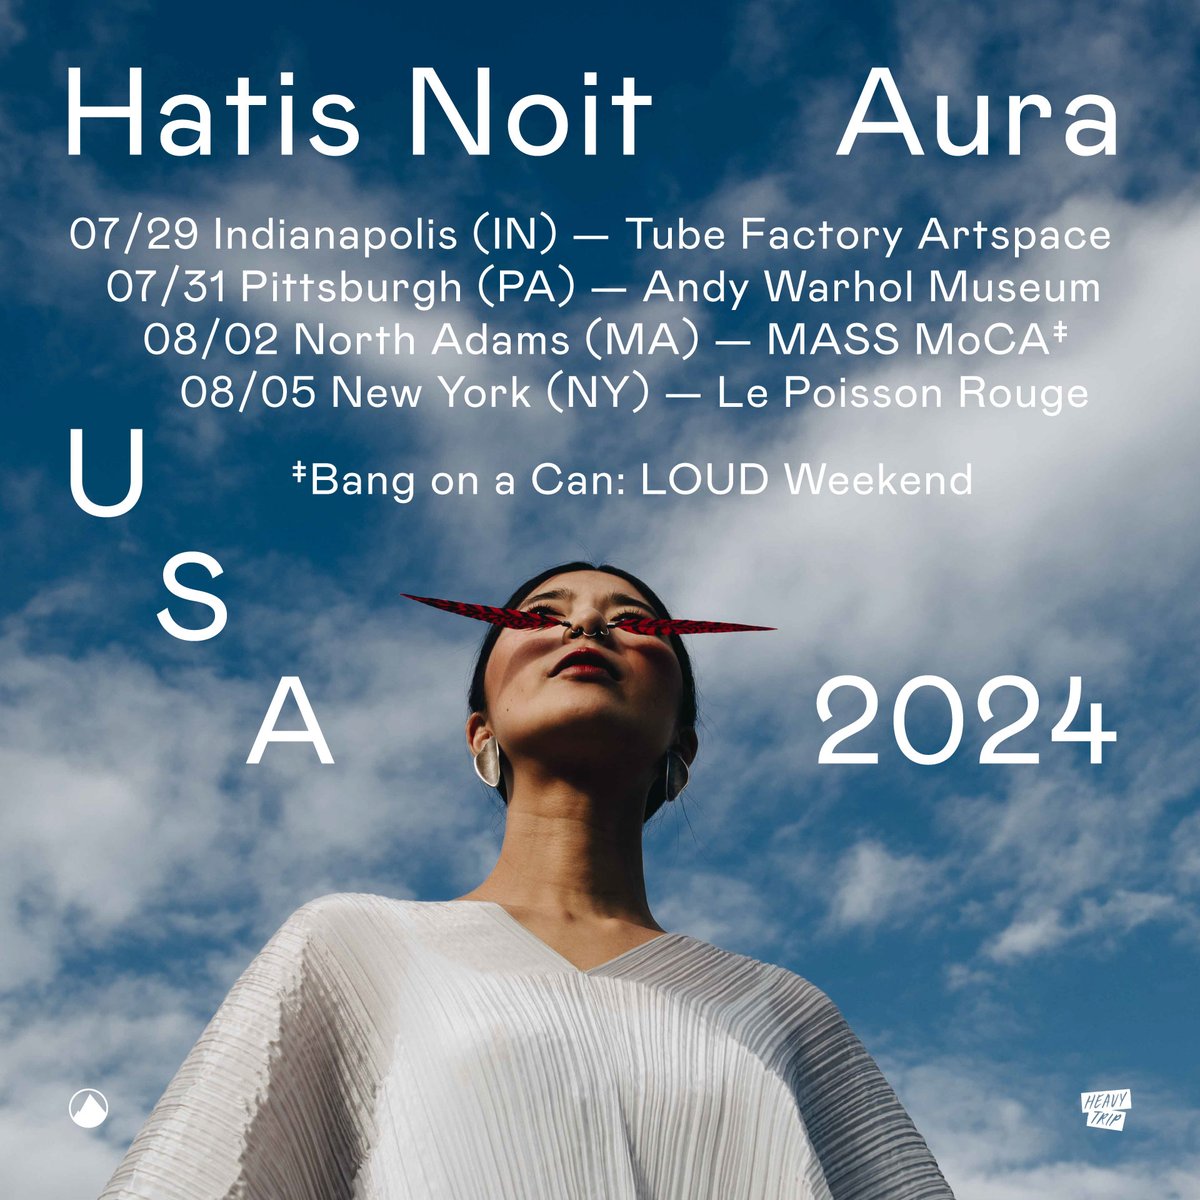 .@Hatis_Noit will return to the US this summer for four additional Aura live shows, including @BangOnACan’s LOUD Weekend at @MASSMoCA and a headline show at New York’s Le Poisson Rouge (@LPRnyc). Tickets are on sale now: hatisnoit.net/shows